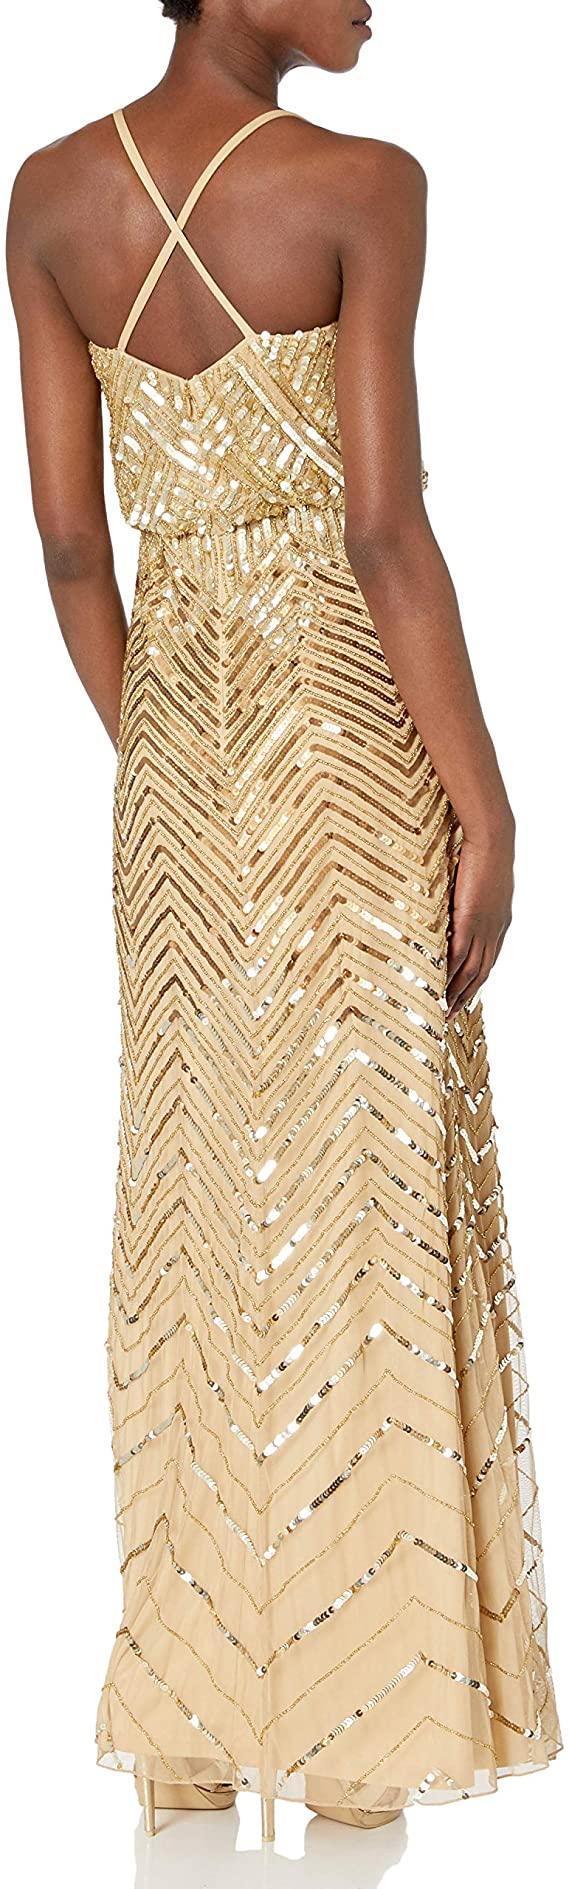 Adrianna Papell Long Beaded Blouson Dress 91869160 - The Dress Outlet